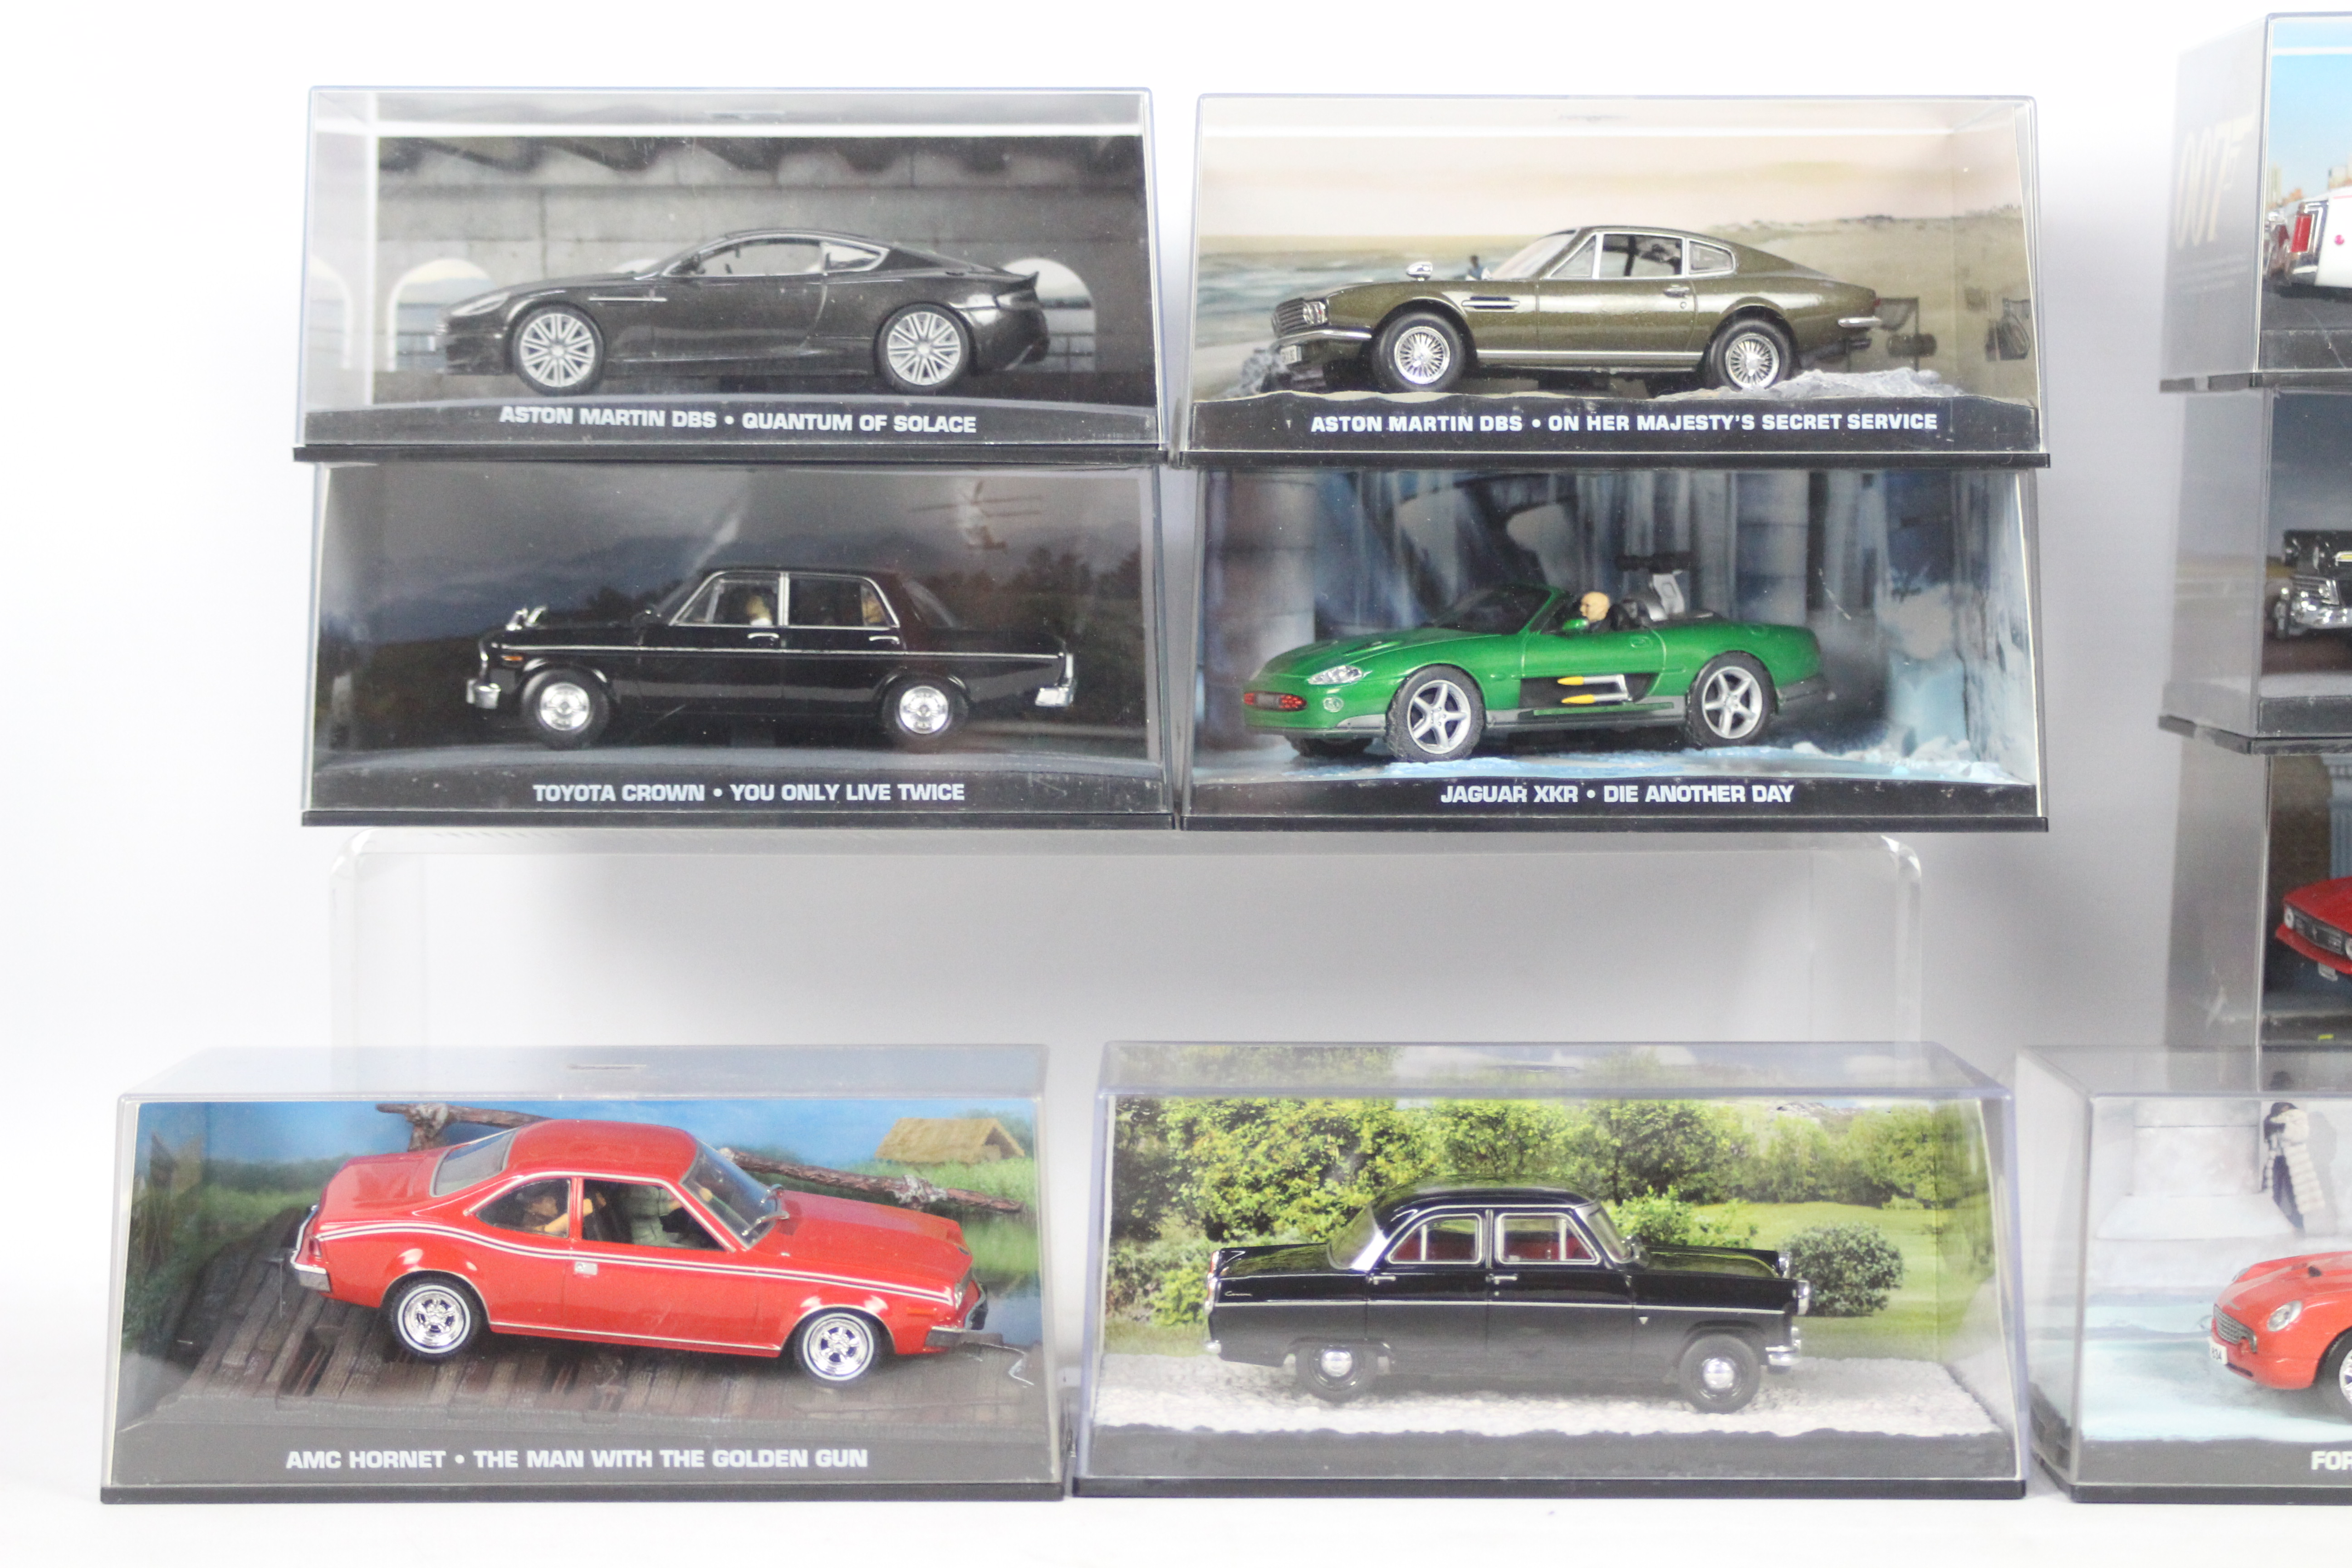 Universal Hobbies / GE Fabbri - 10 boxed diecast model vehicles from 'The James Bond Car - Image 2 of 3